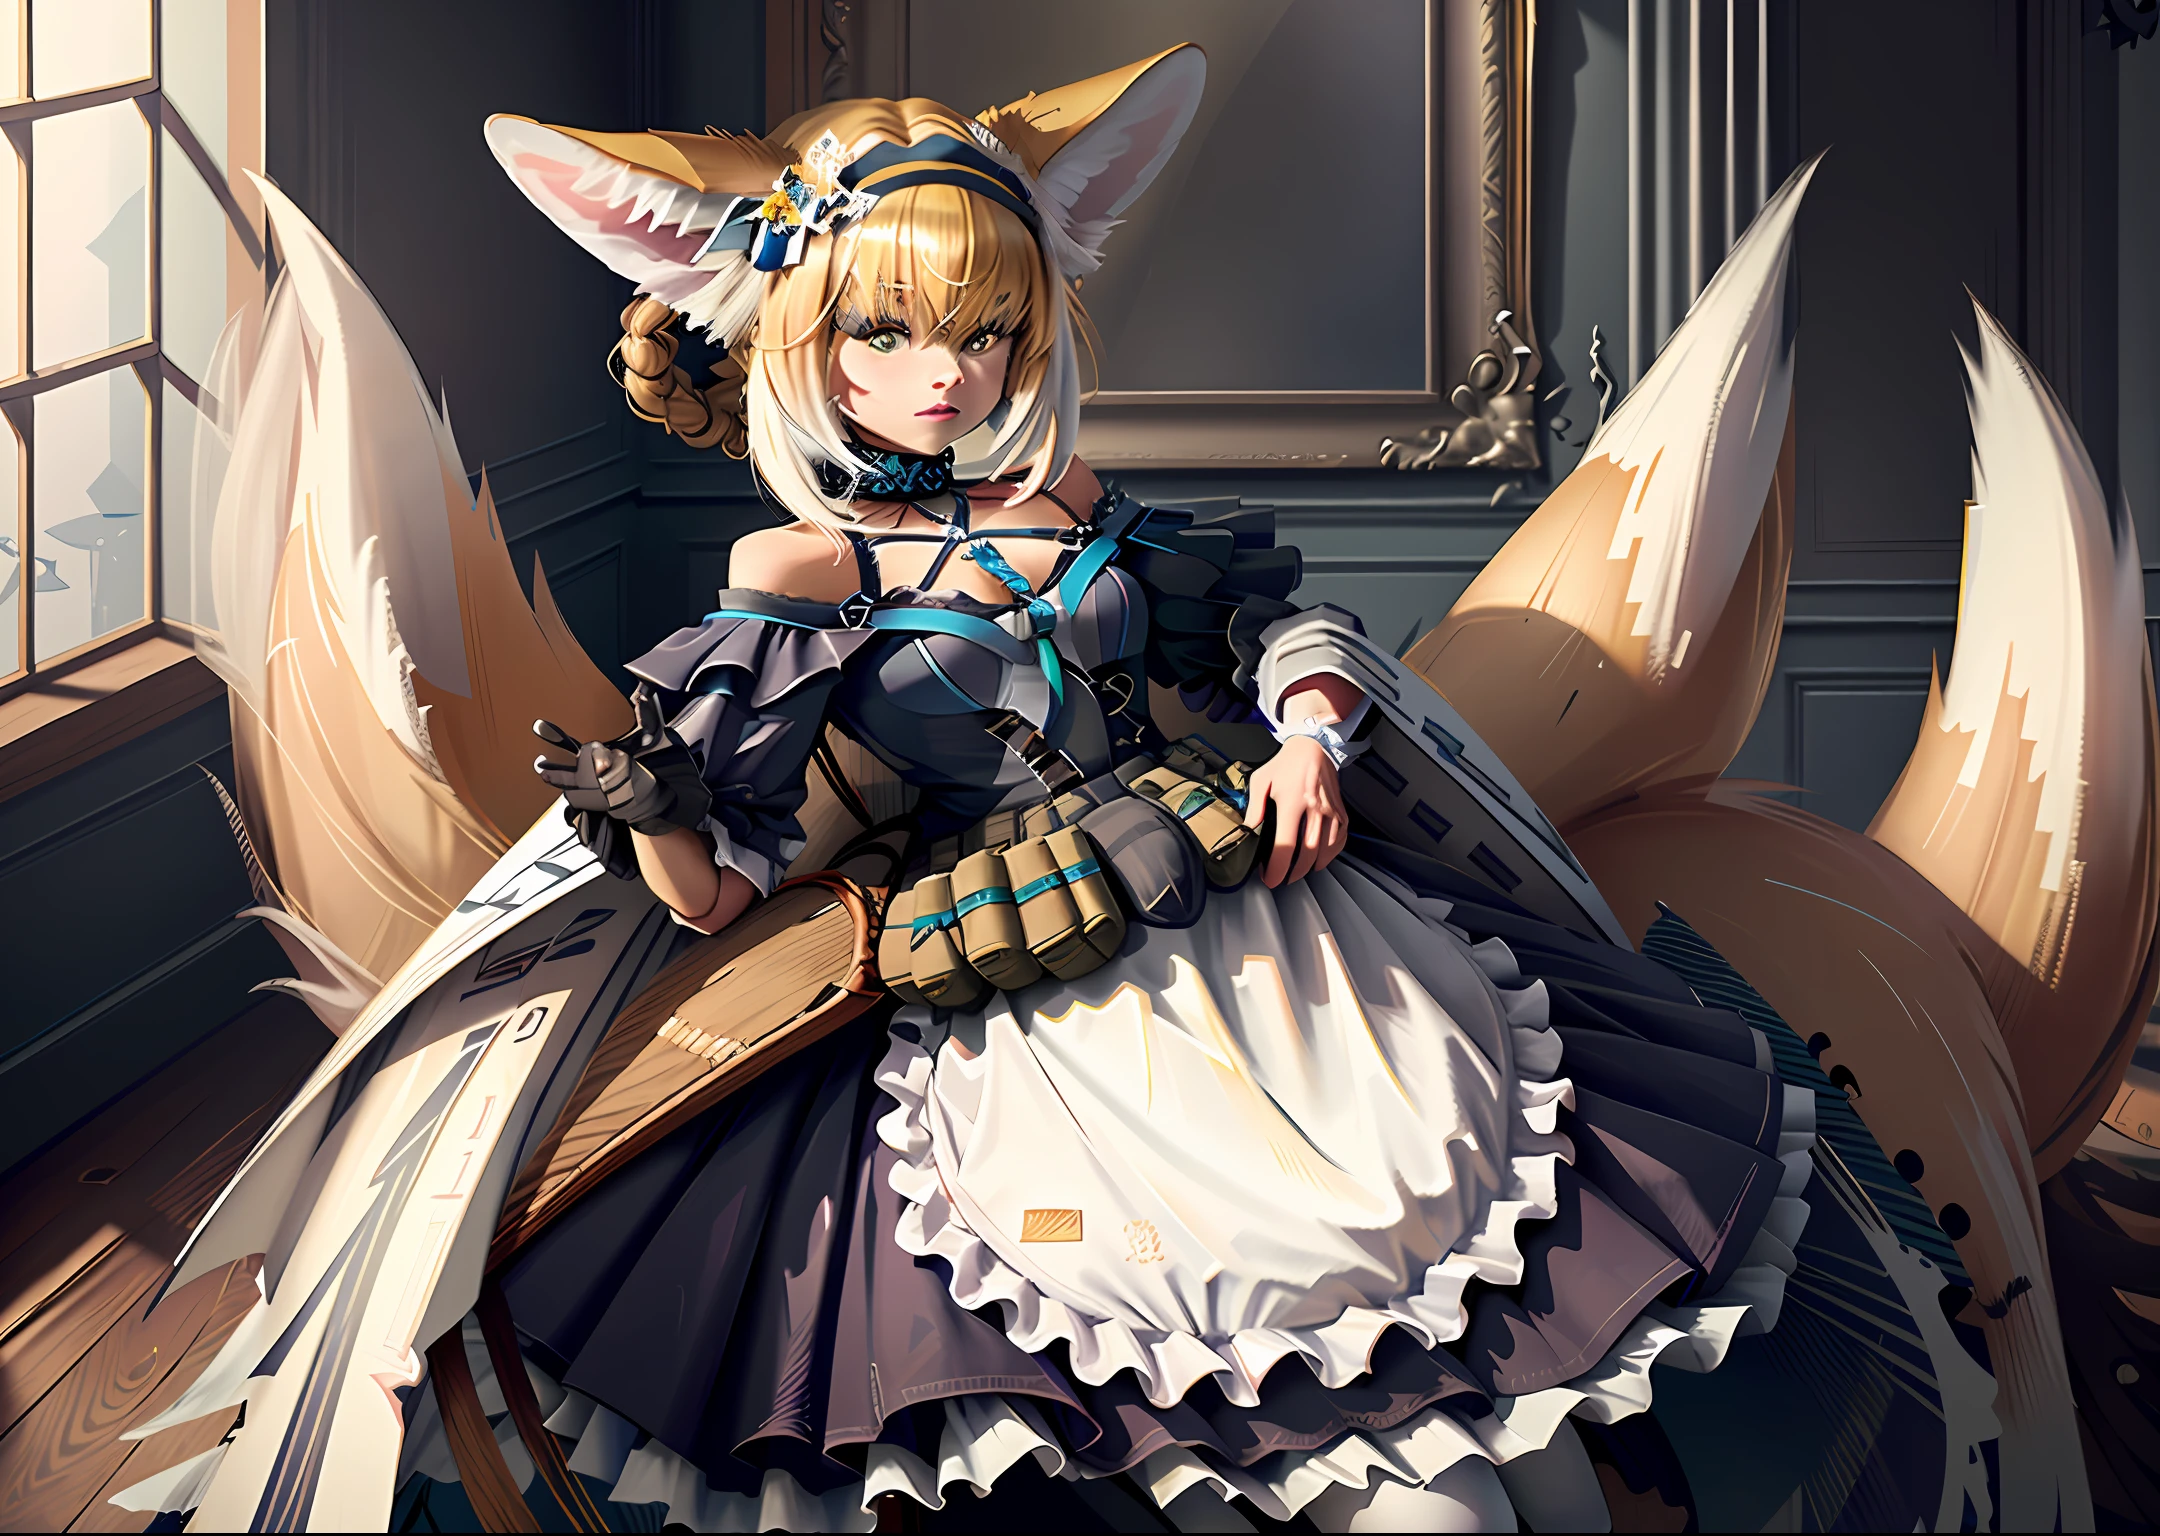 Create a stunning digital artwork in 8K resolution that showcases a captivating and lifelike portrayal of a majestic Lucario in a maid outfit. Ensure that every aspect of the artwork exudes the utmost quality and attention to detail, emphasizing the clarity and intricacy of its eyes and pupils. Capture the essence of elegance and charm as you depict the Lucario with its unique blend of strength and grace, beautifully blending its warrior nature with the maid persona. Let the composition radiate with vibrant colors, immaculate textures, and mesmerizing lighting, resulting in a masterpiece that is truly awe-inspiring and mesmerizing to behold.